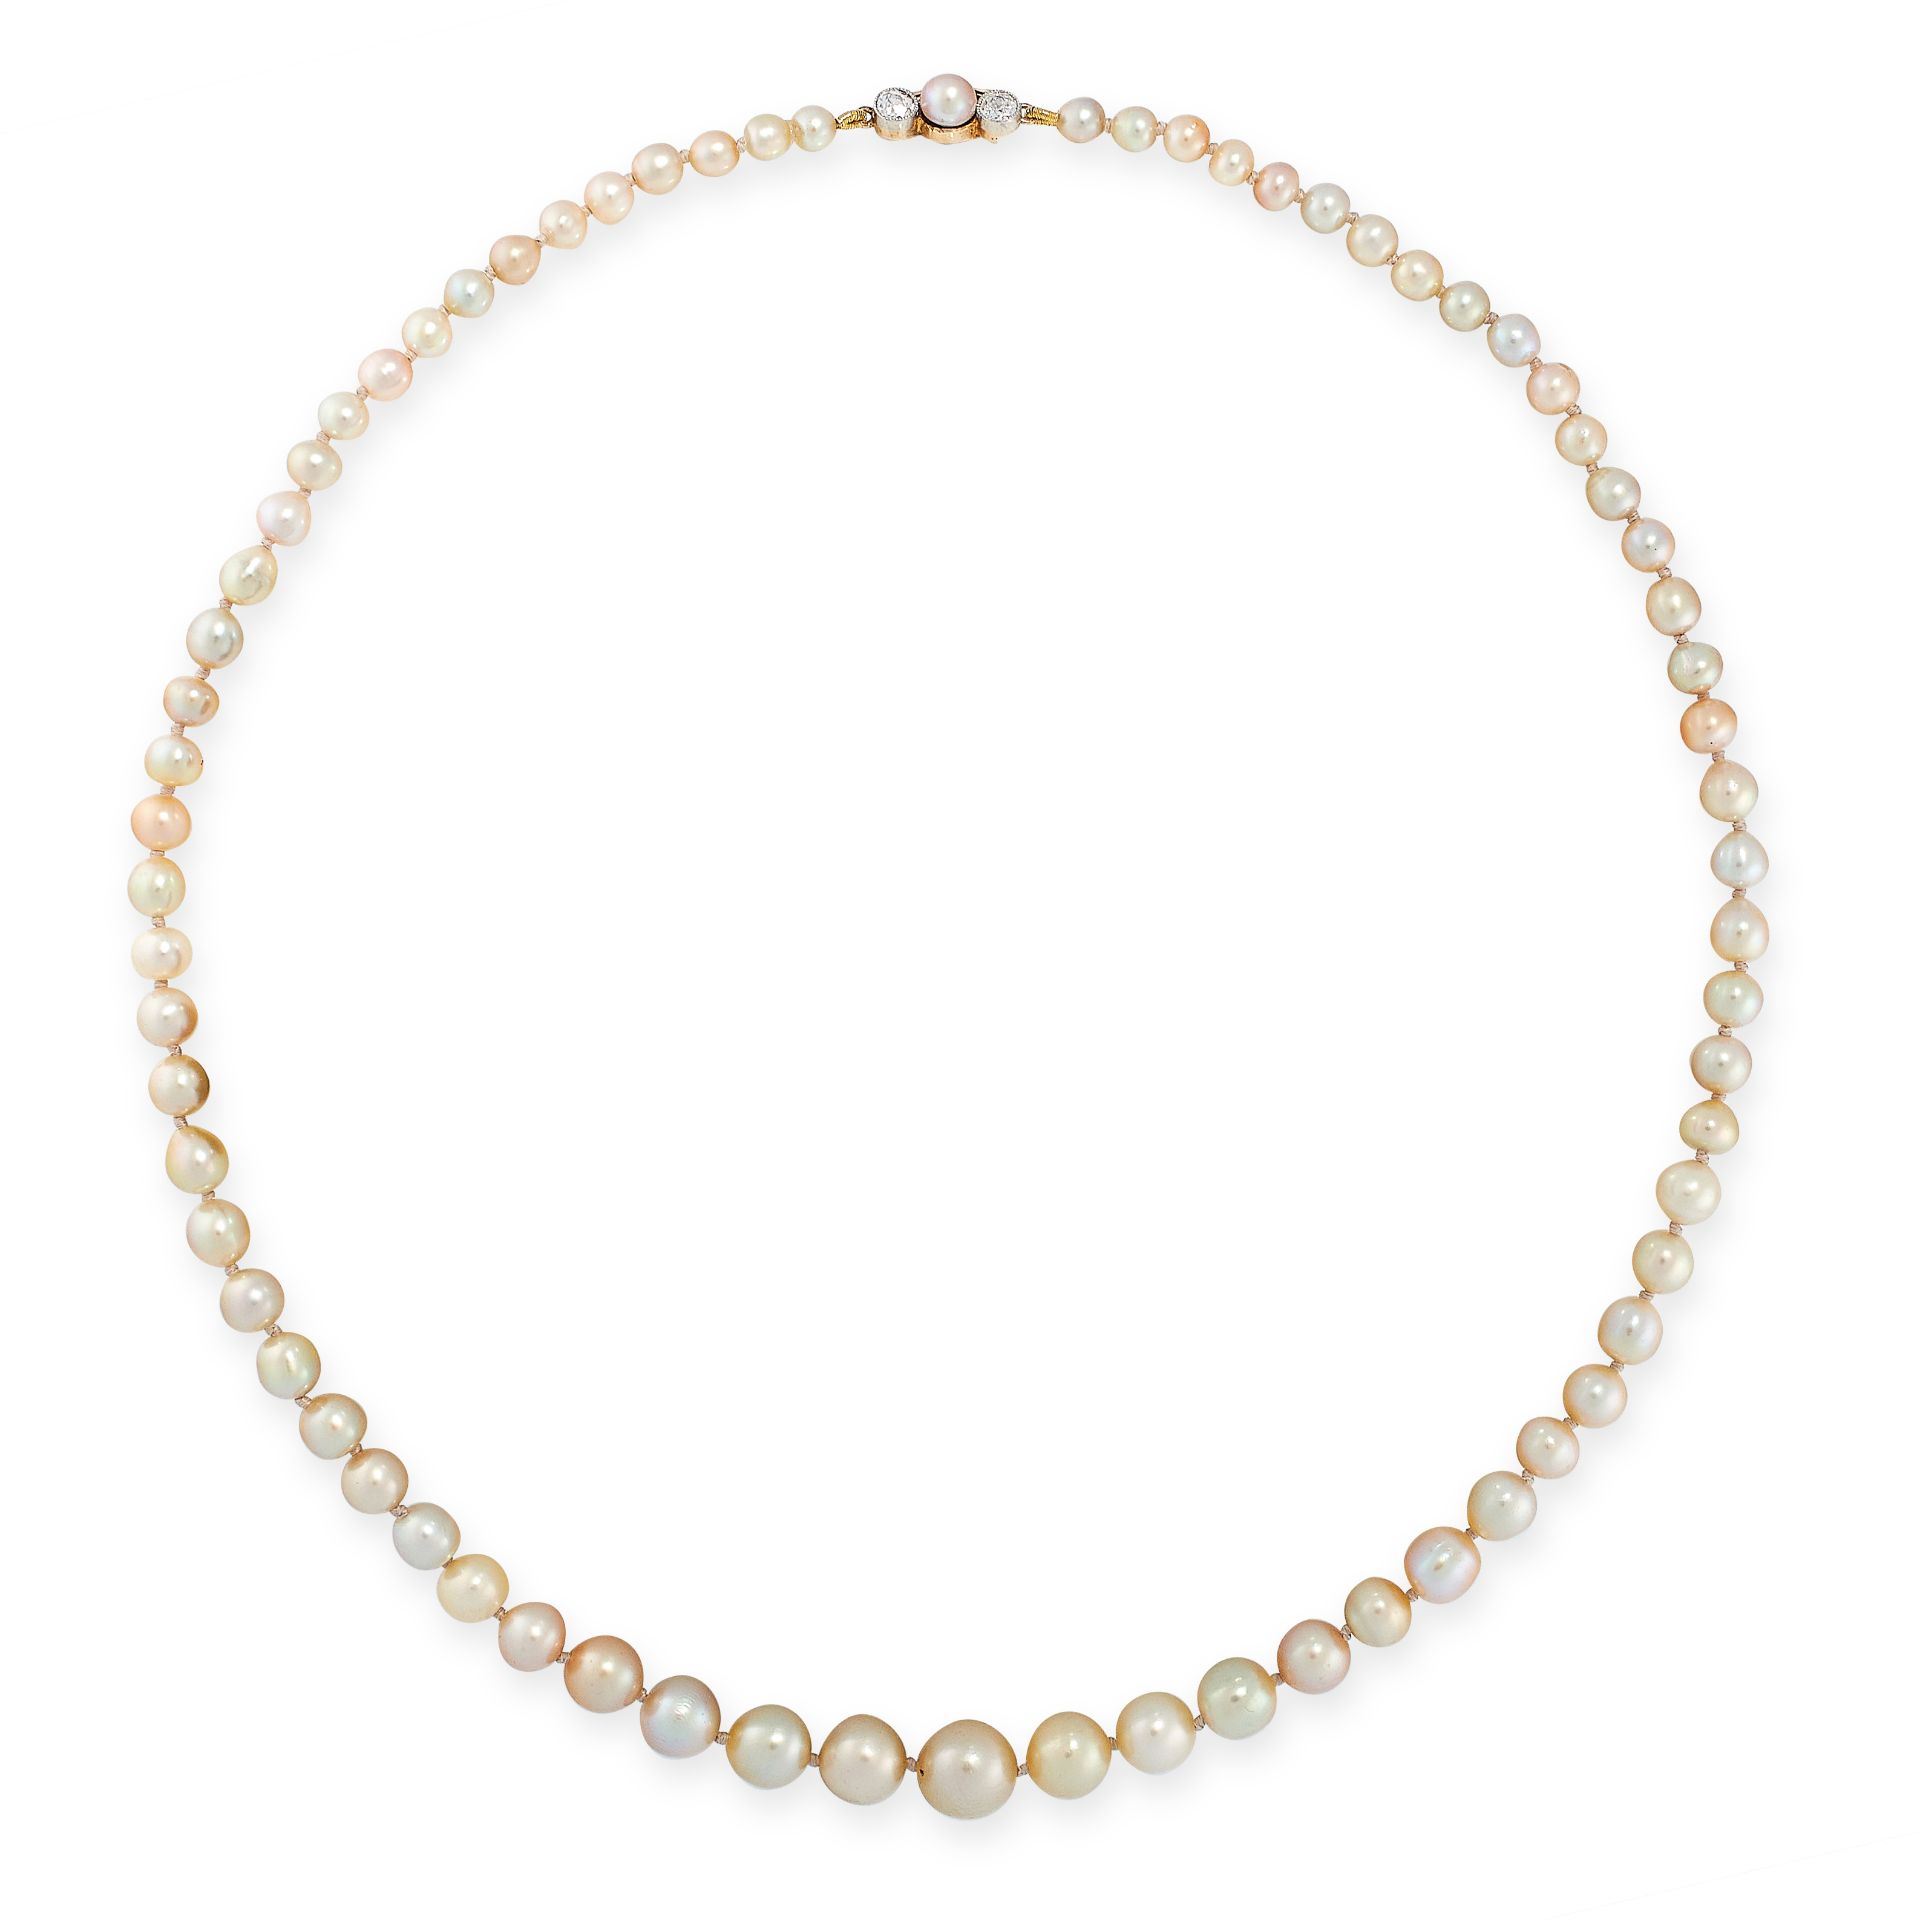 NATURAL PEARL AND DIAMOND NECKLACE comprising a single row of seventy-one graduated pearls ranging